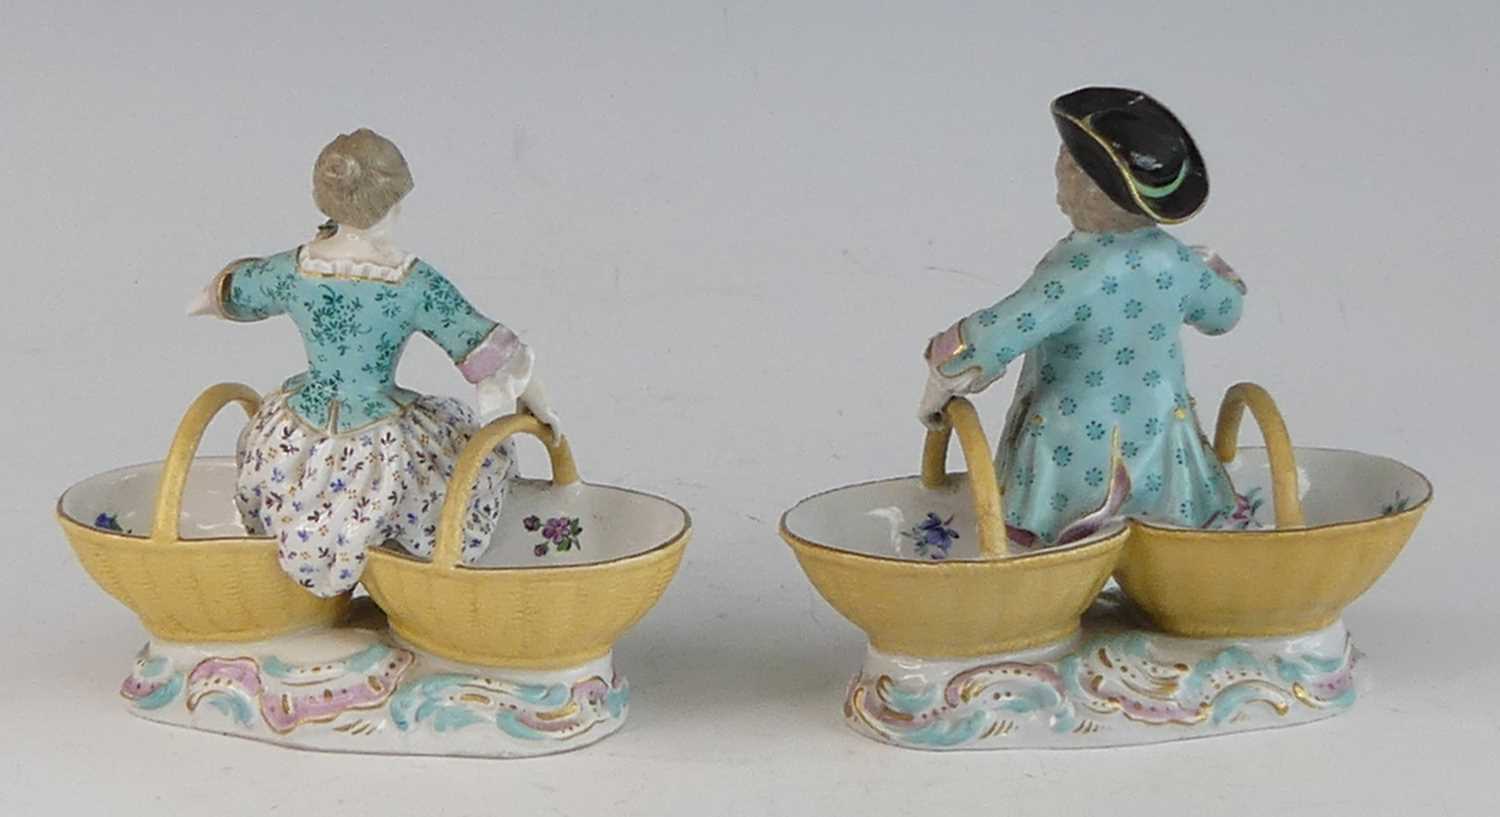 A pair of Meissen porcelain figural table salts, late 19th century, each shown in 18th century - Image 2 of 4